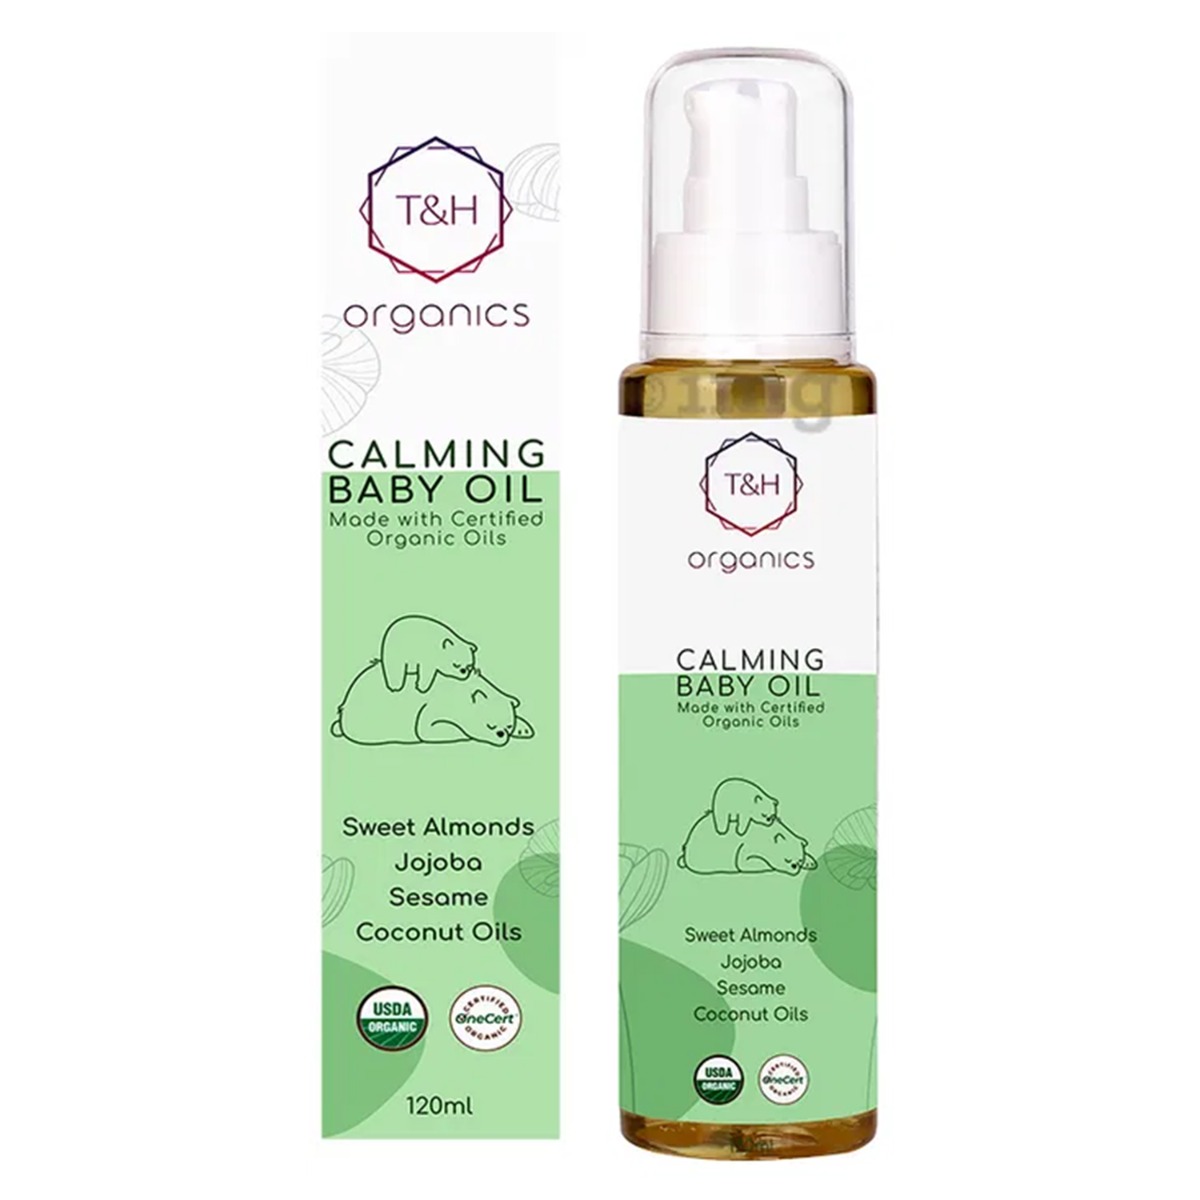 T&H Organics Calming Baby Oil With Certified Organic Oils, 120ml